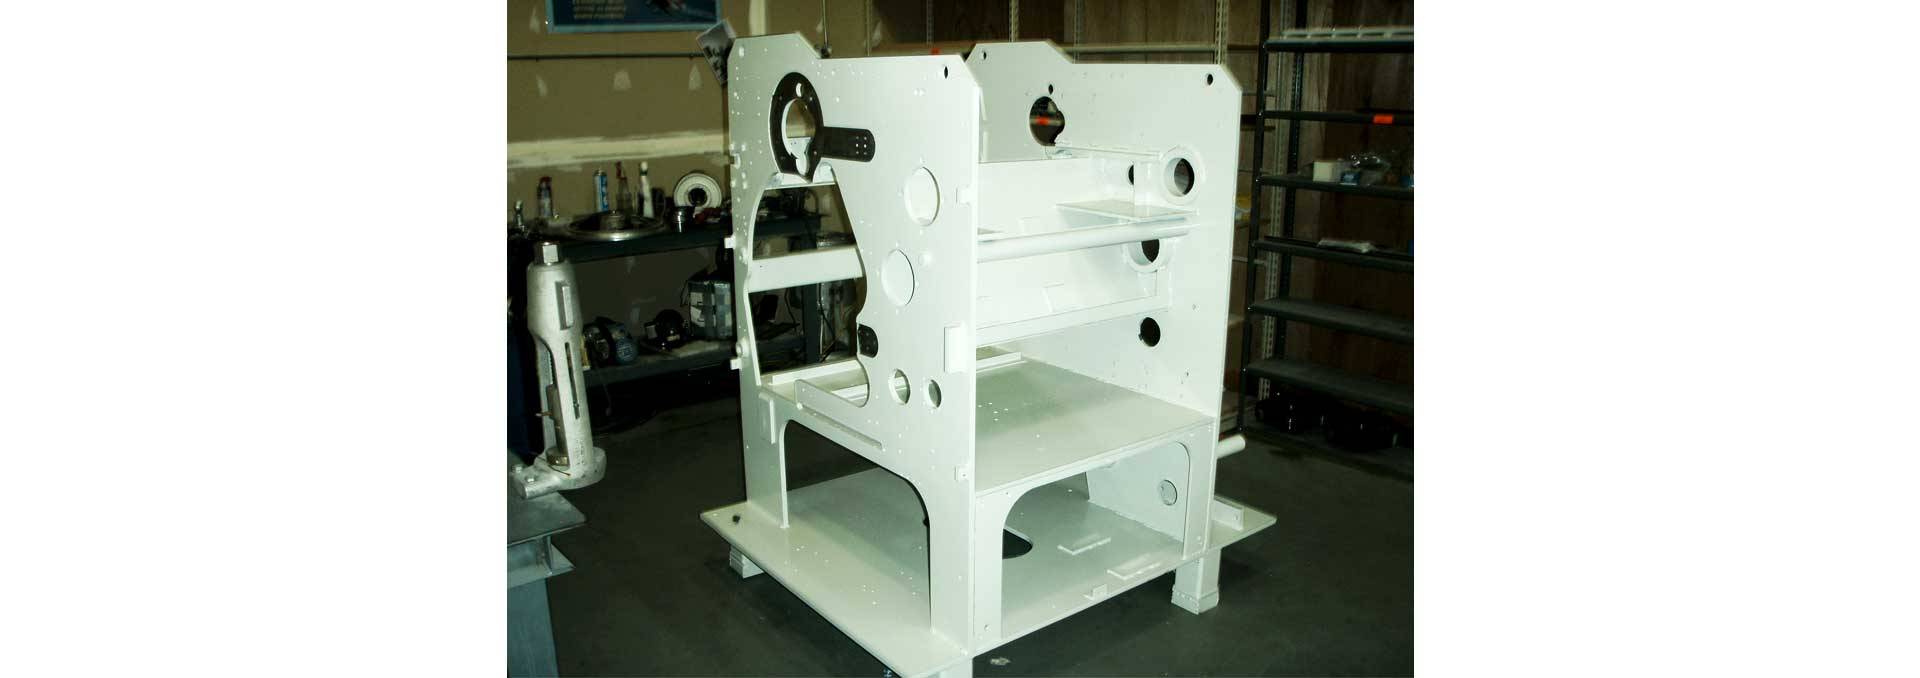 WP Winkler Admiral Divider and Admiral Divider Rebuild, WP Bakery Group USA, Retail, Wholesale and Industrial Bakery Equipment and Food Service Industry Equipment, Shelton, CT USA